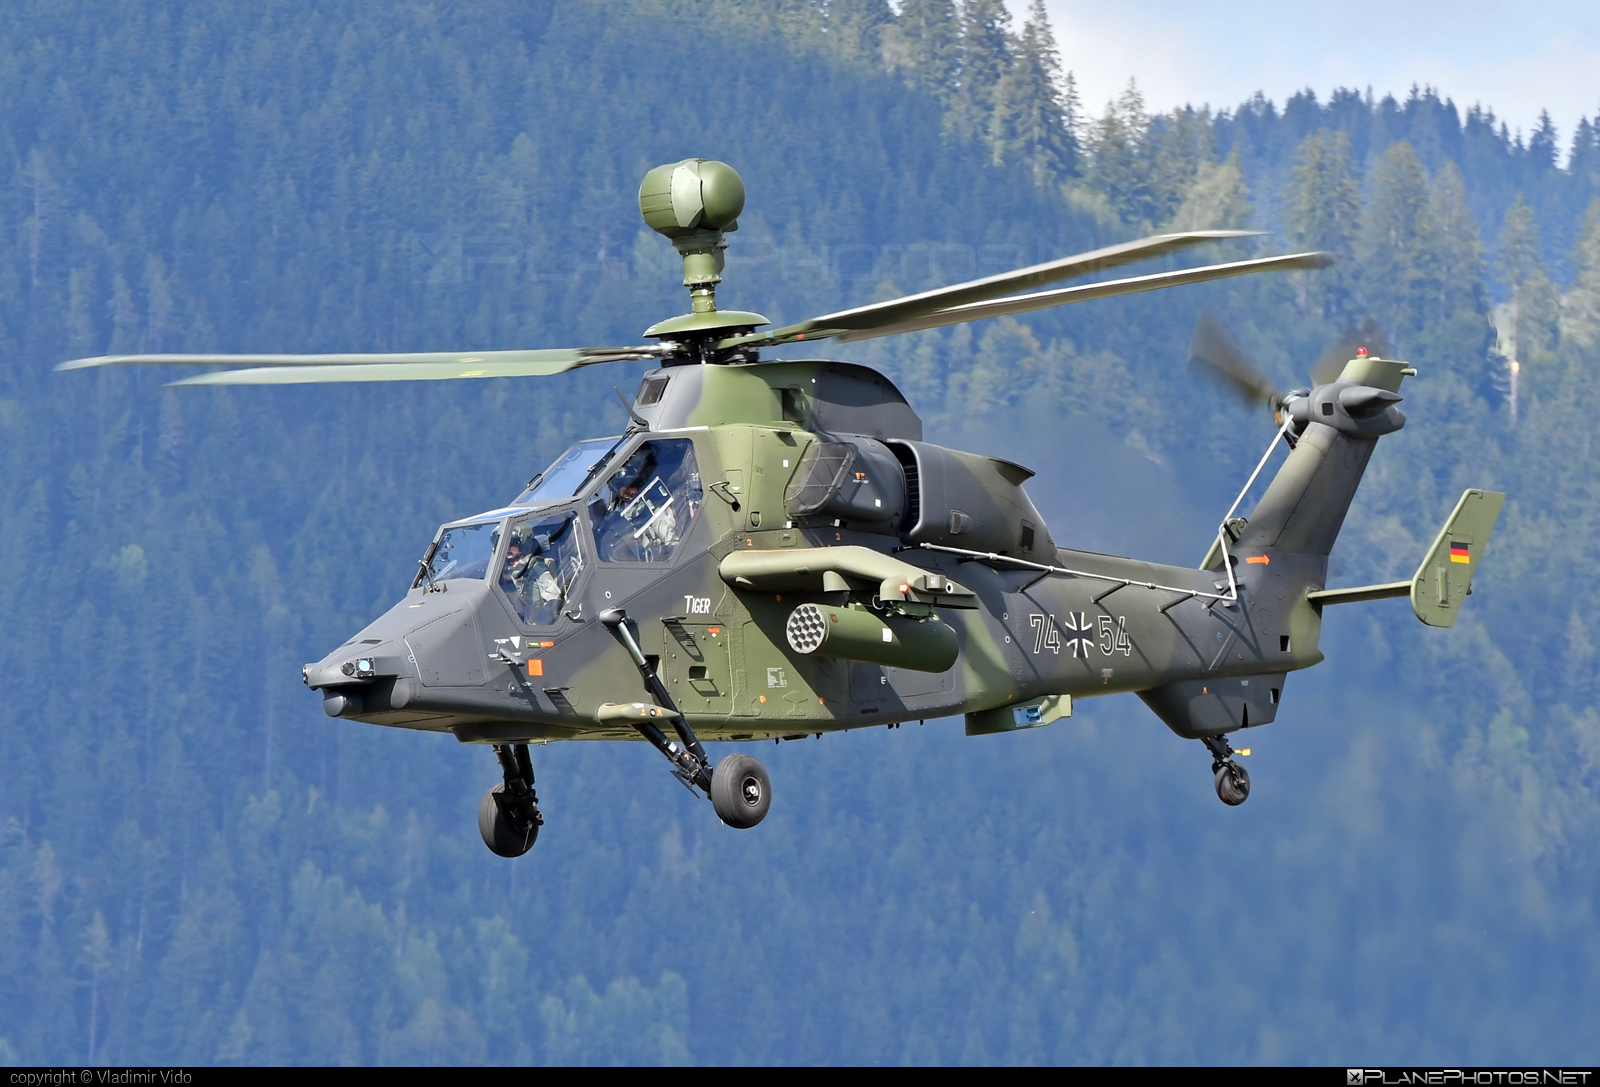 Eurocopter EC665 Tiger UHT - 74+54 operated by Luftwaffe (German Air Force) #GermanAirForce #airpower2022 #ec665tiger #ec665tigerUht #eurocopter #eurocopterTiger #luftwaffe #tigerUht